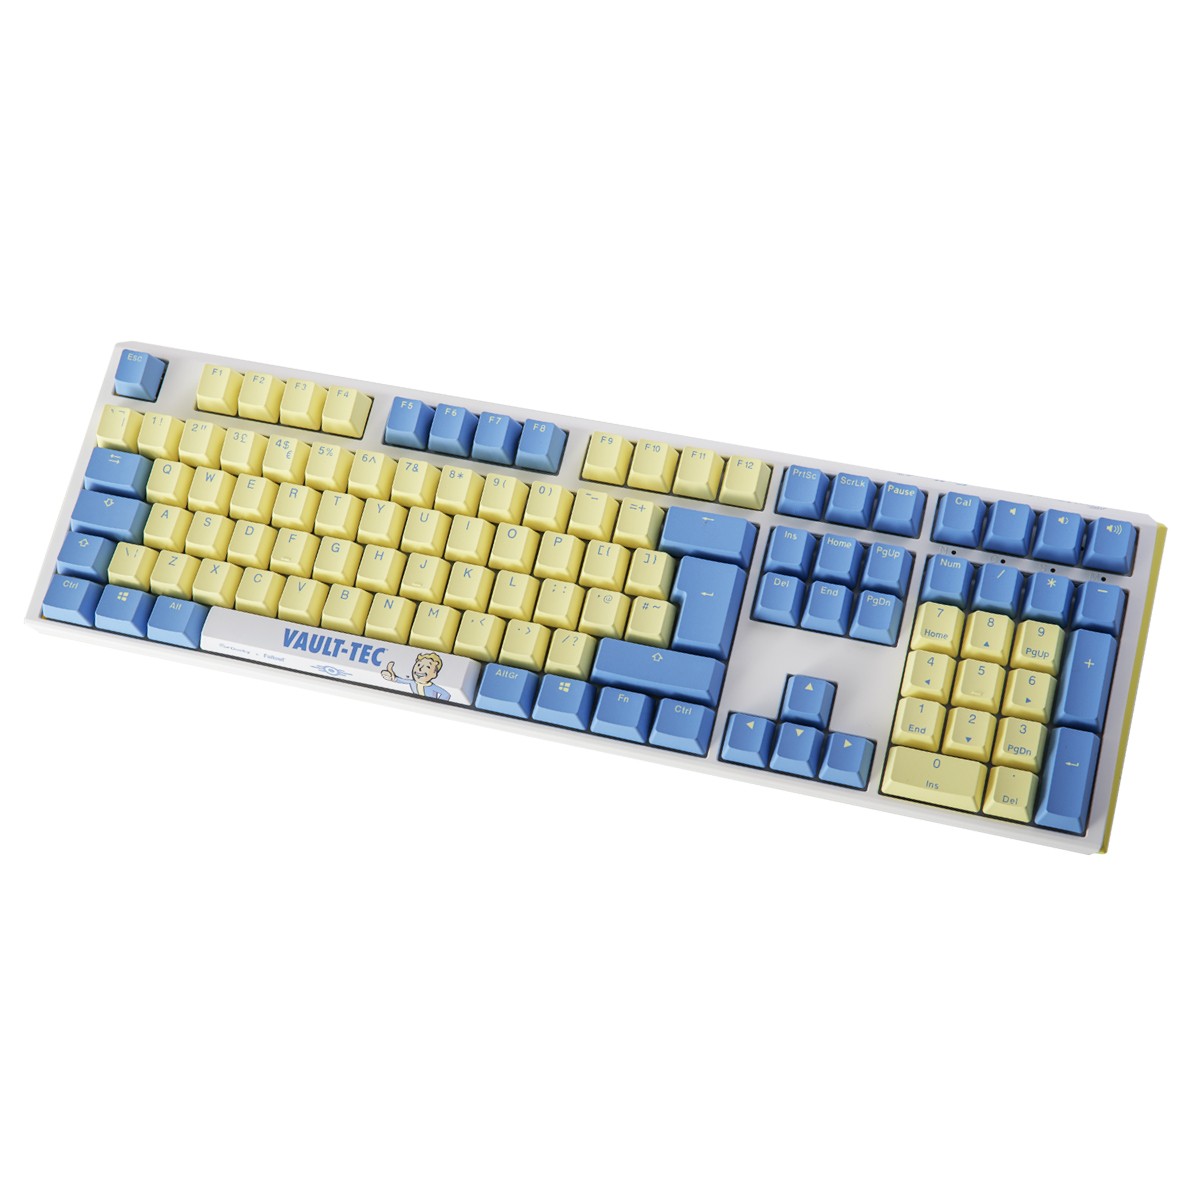 Ducky - Ducky x Fallout One 3 RGB LE Cherry Blue Switch Mechanical Gaming Keyboard UK Layout